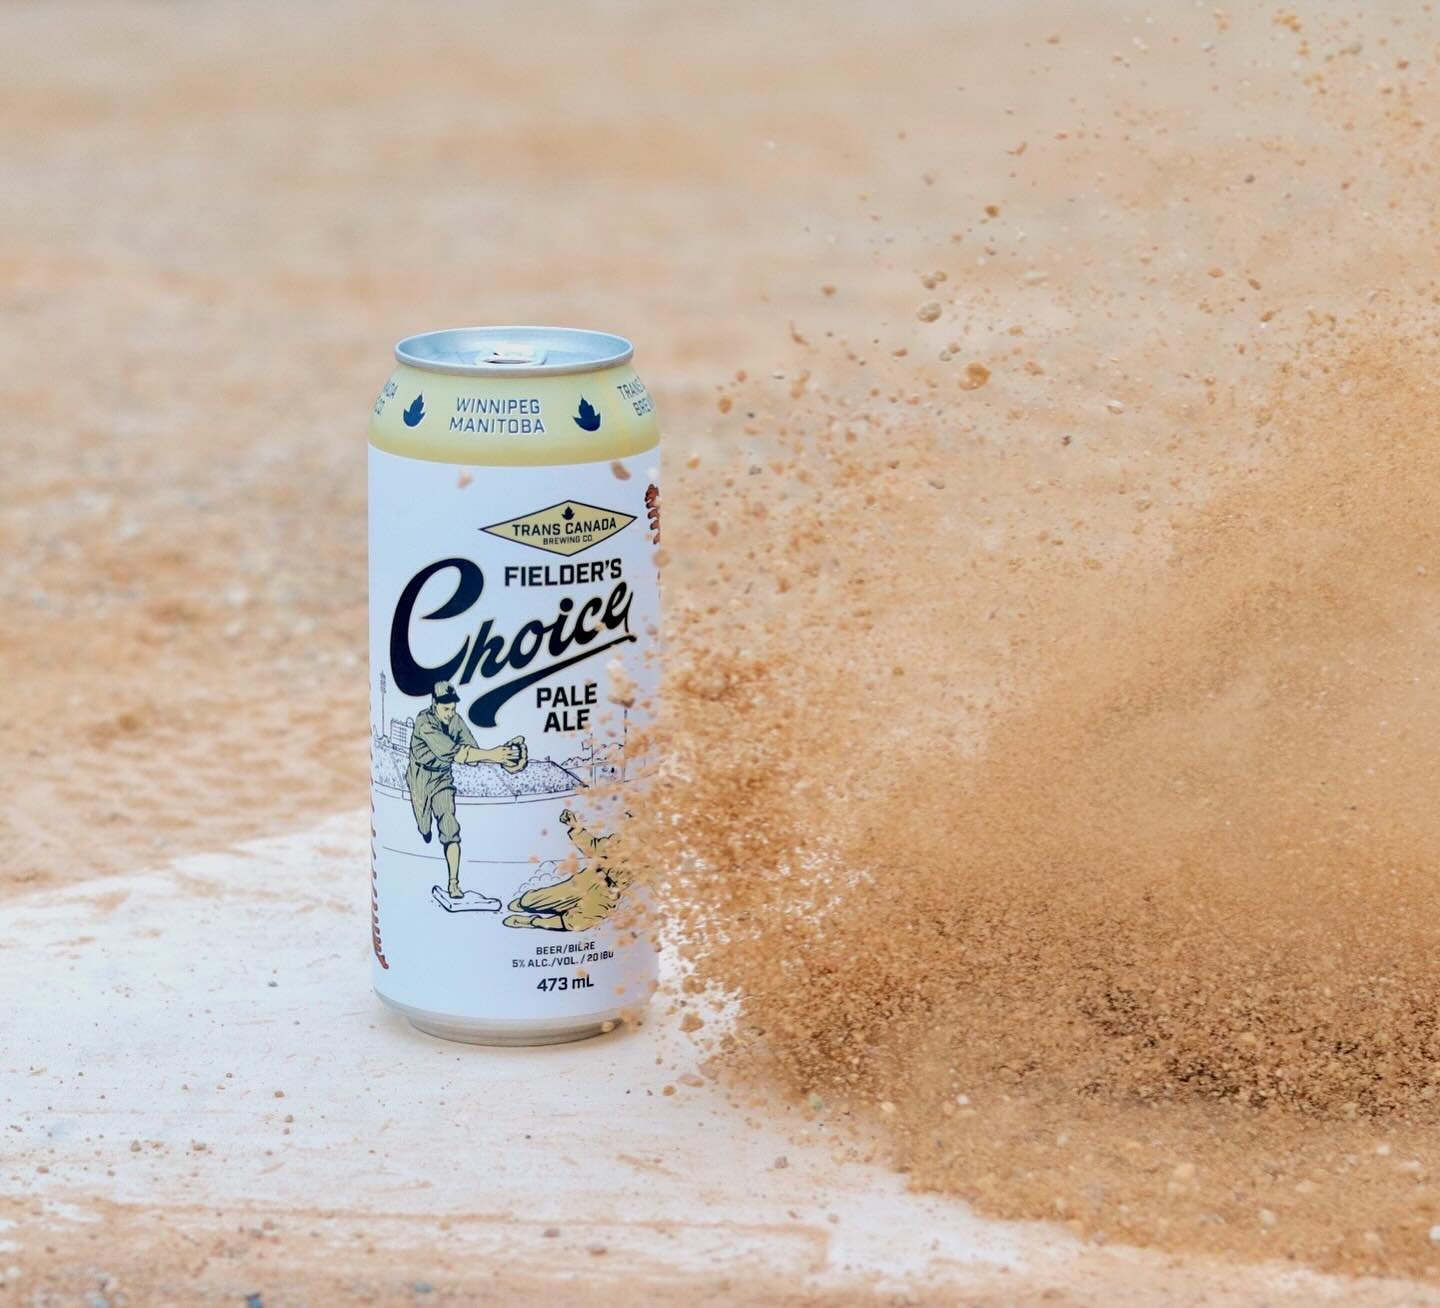 A home run in every sip!⚾️

Fielder&rsquo;s Choice knocks it out of the ballpark with its nutty malt flavour and caramel notes. We&rsquo;re excited to bring back this easy-drinking pale ale for the summer!

Join us and the @wpg_goldeyes in the taproo